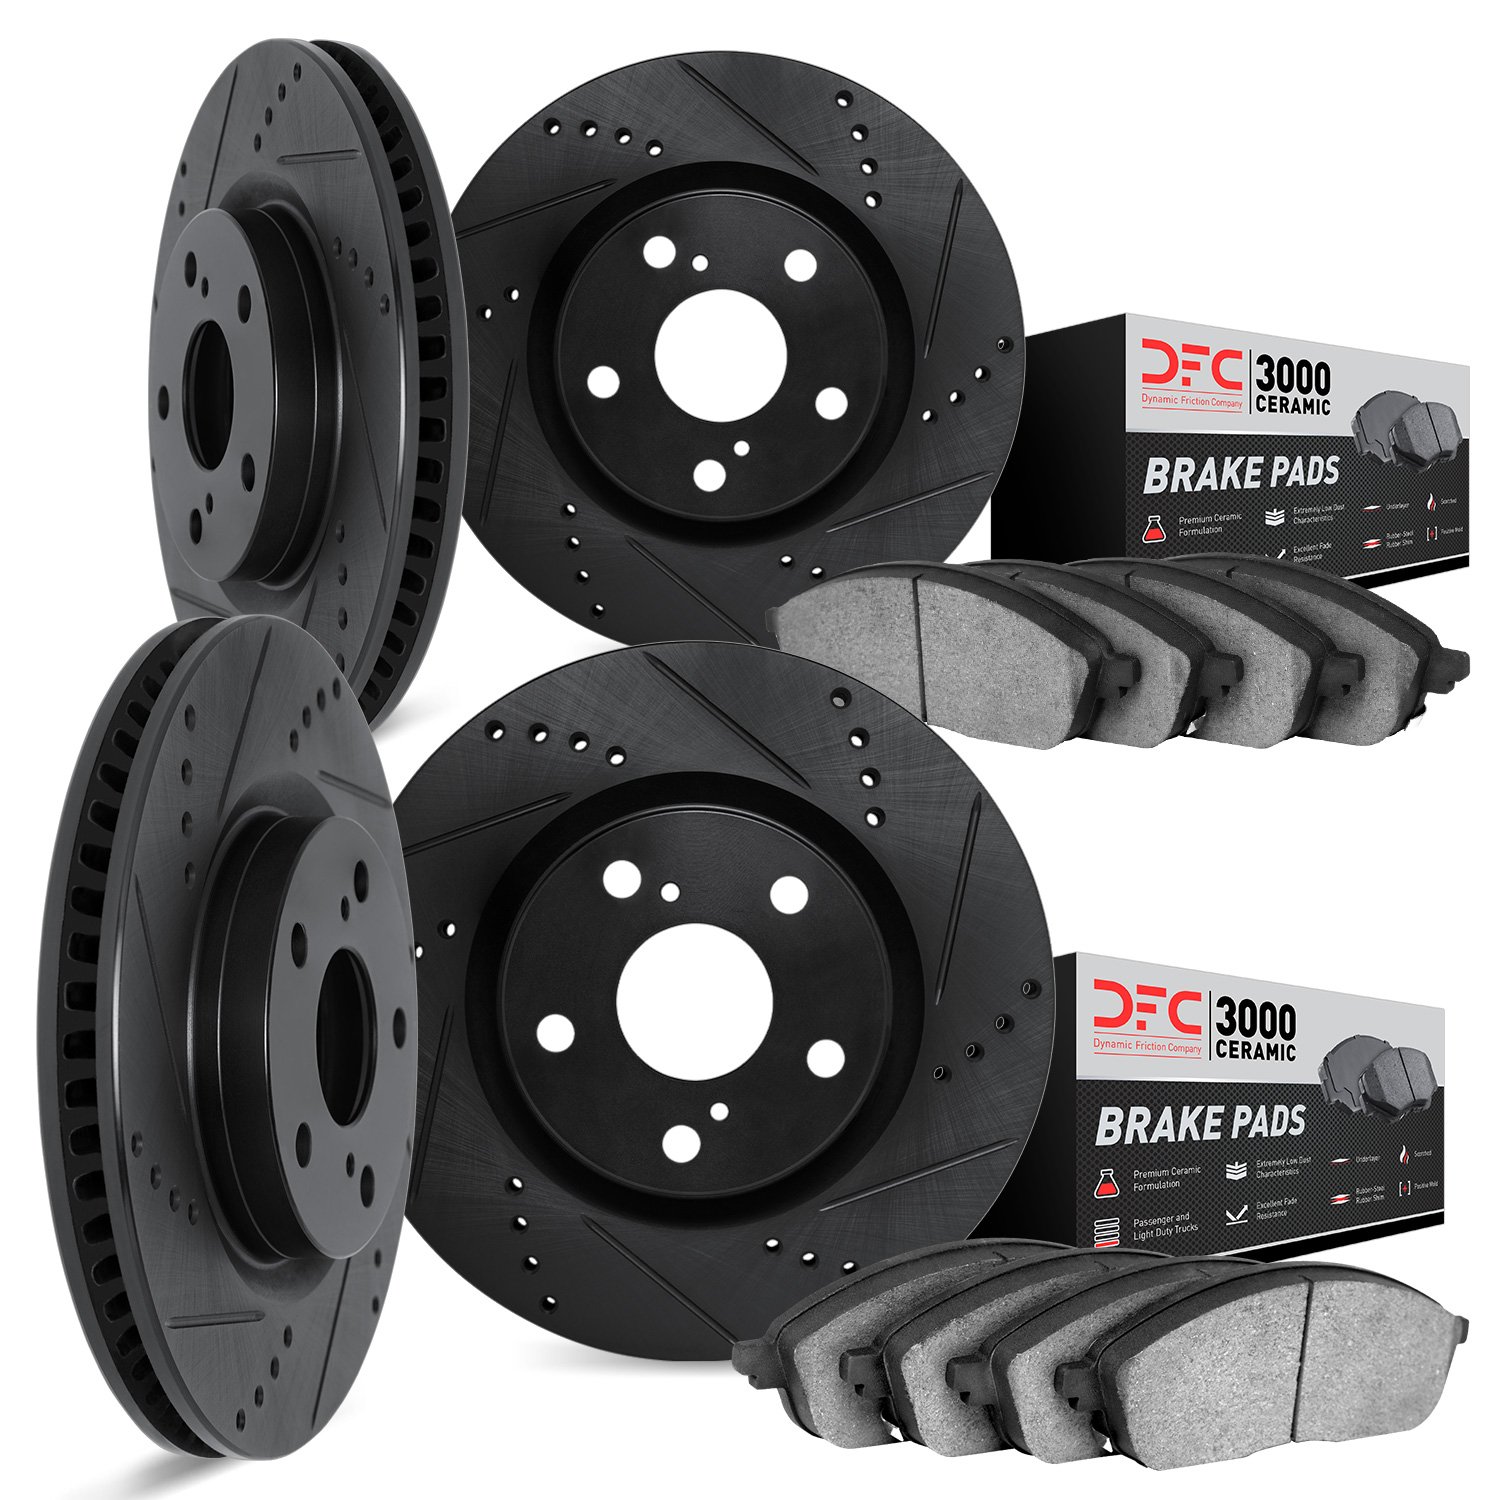 8304-31064 Drilled/Slotted Brake Rotors with 3000-Series Ceramic Brake Pads Kit [Black], 2008-2013 BMW, Position: Front and Rear